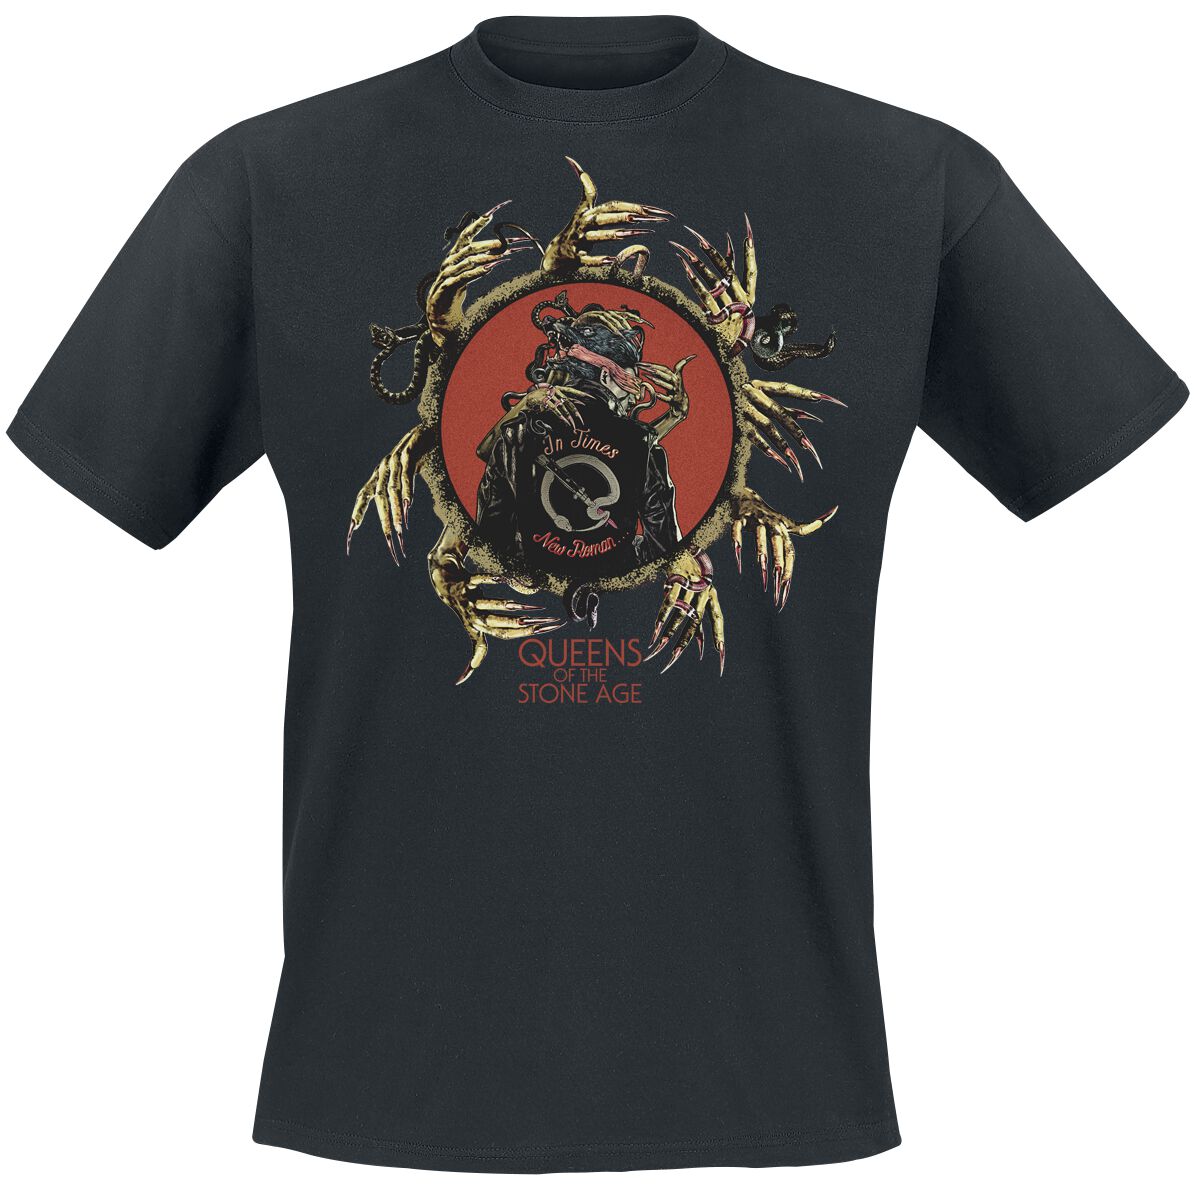 Image of T-Shirt di Queens Of The Stone Age - In Times New Roman - Circle Hands - S a 3XL - Uomo - nero